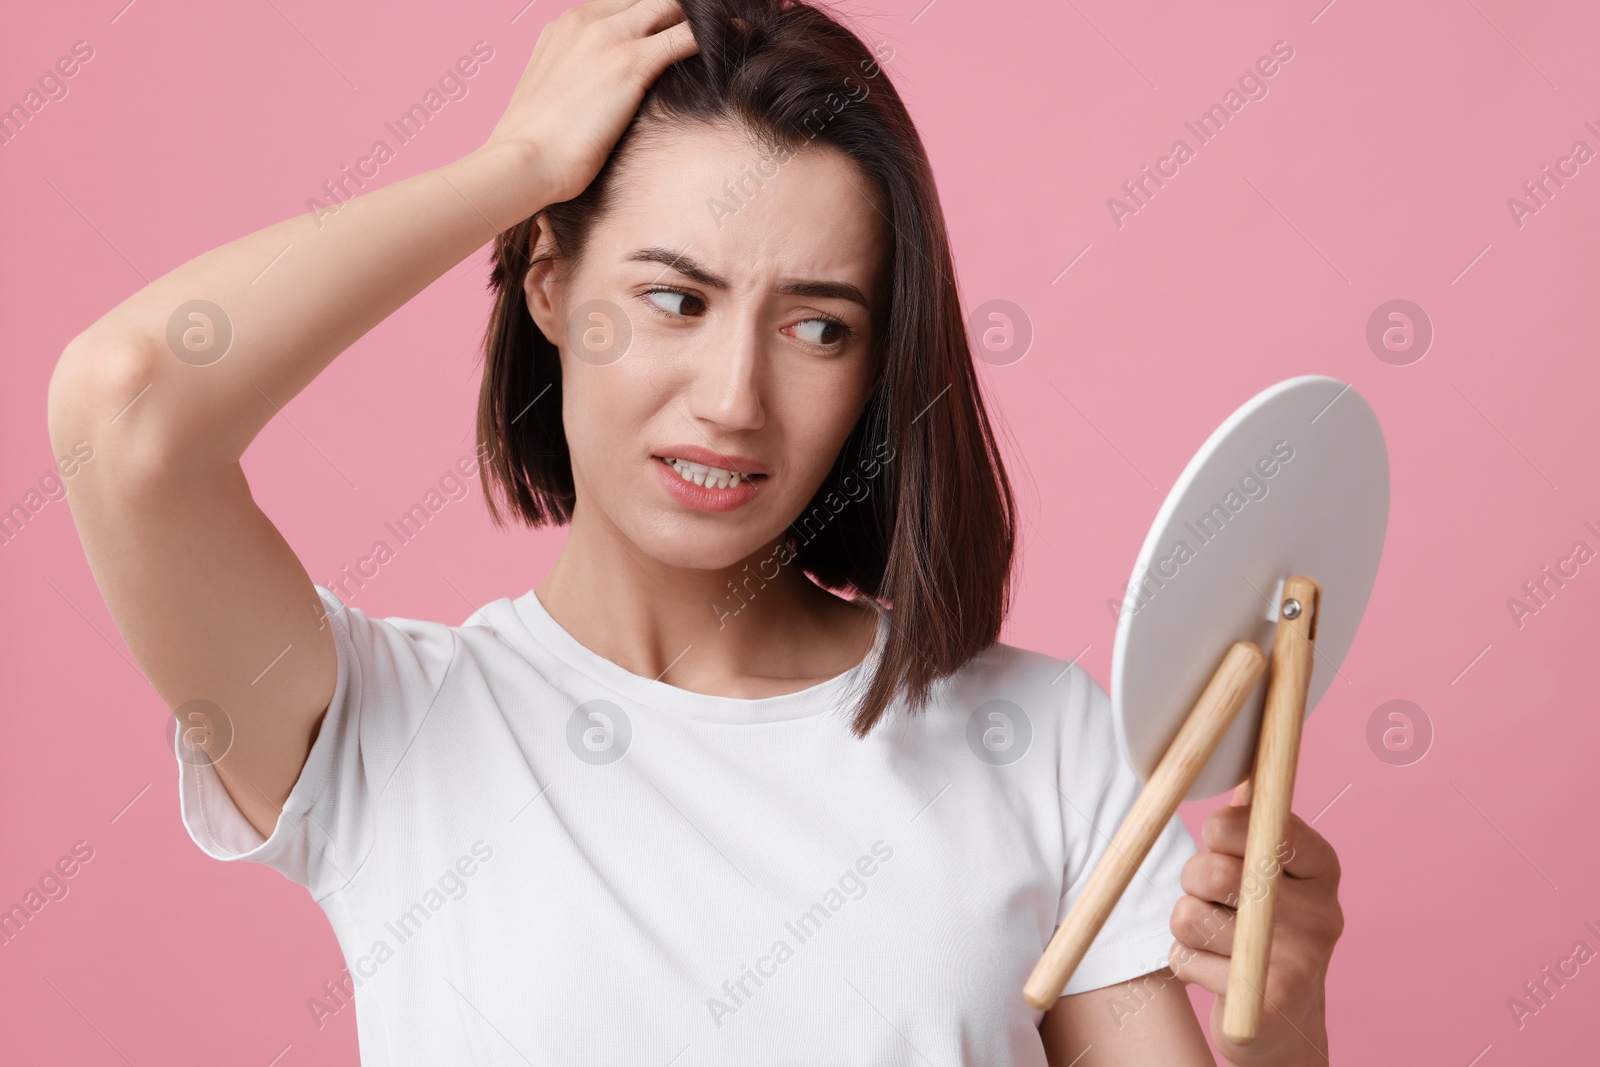 Photo of Sad woman with hair loss problem looking at mirror on pink background